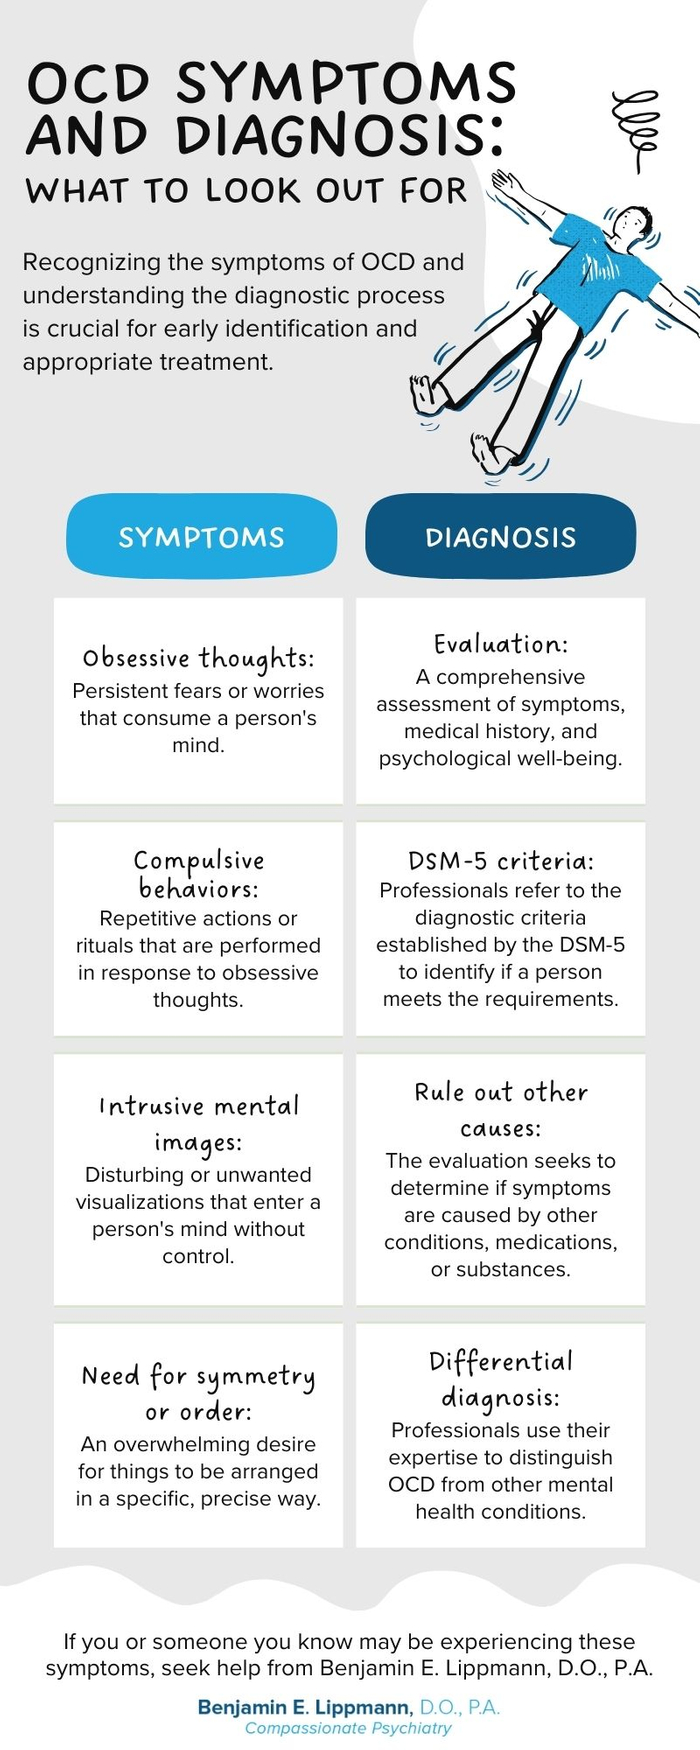 OCD Symptoms and Diagnosis: What to Look Out For Infographic